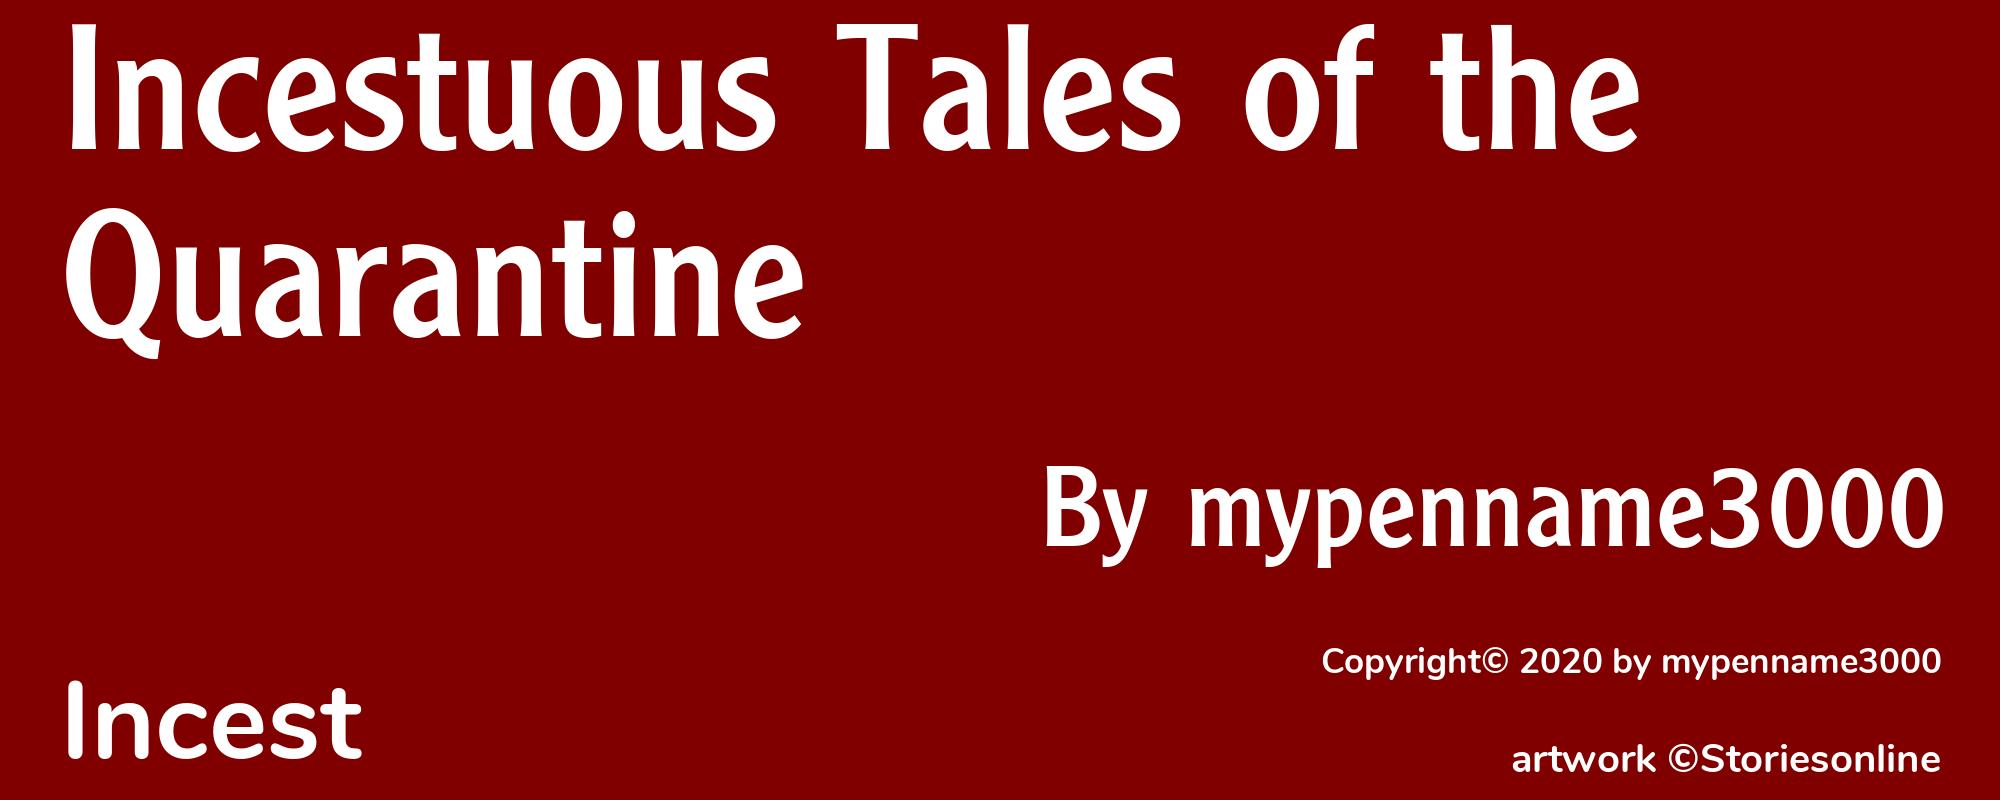 Incestuous Tales of the Quarantine - Cover